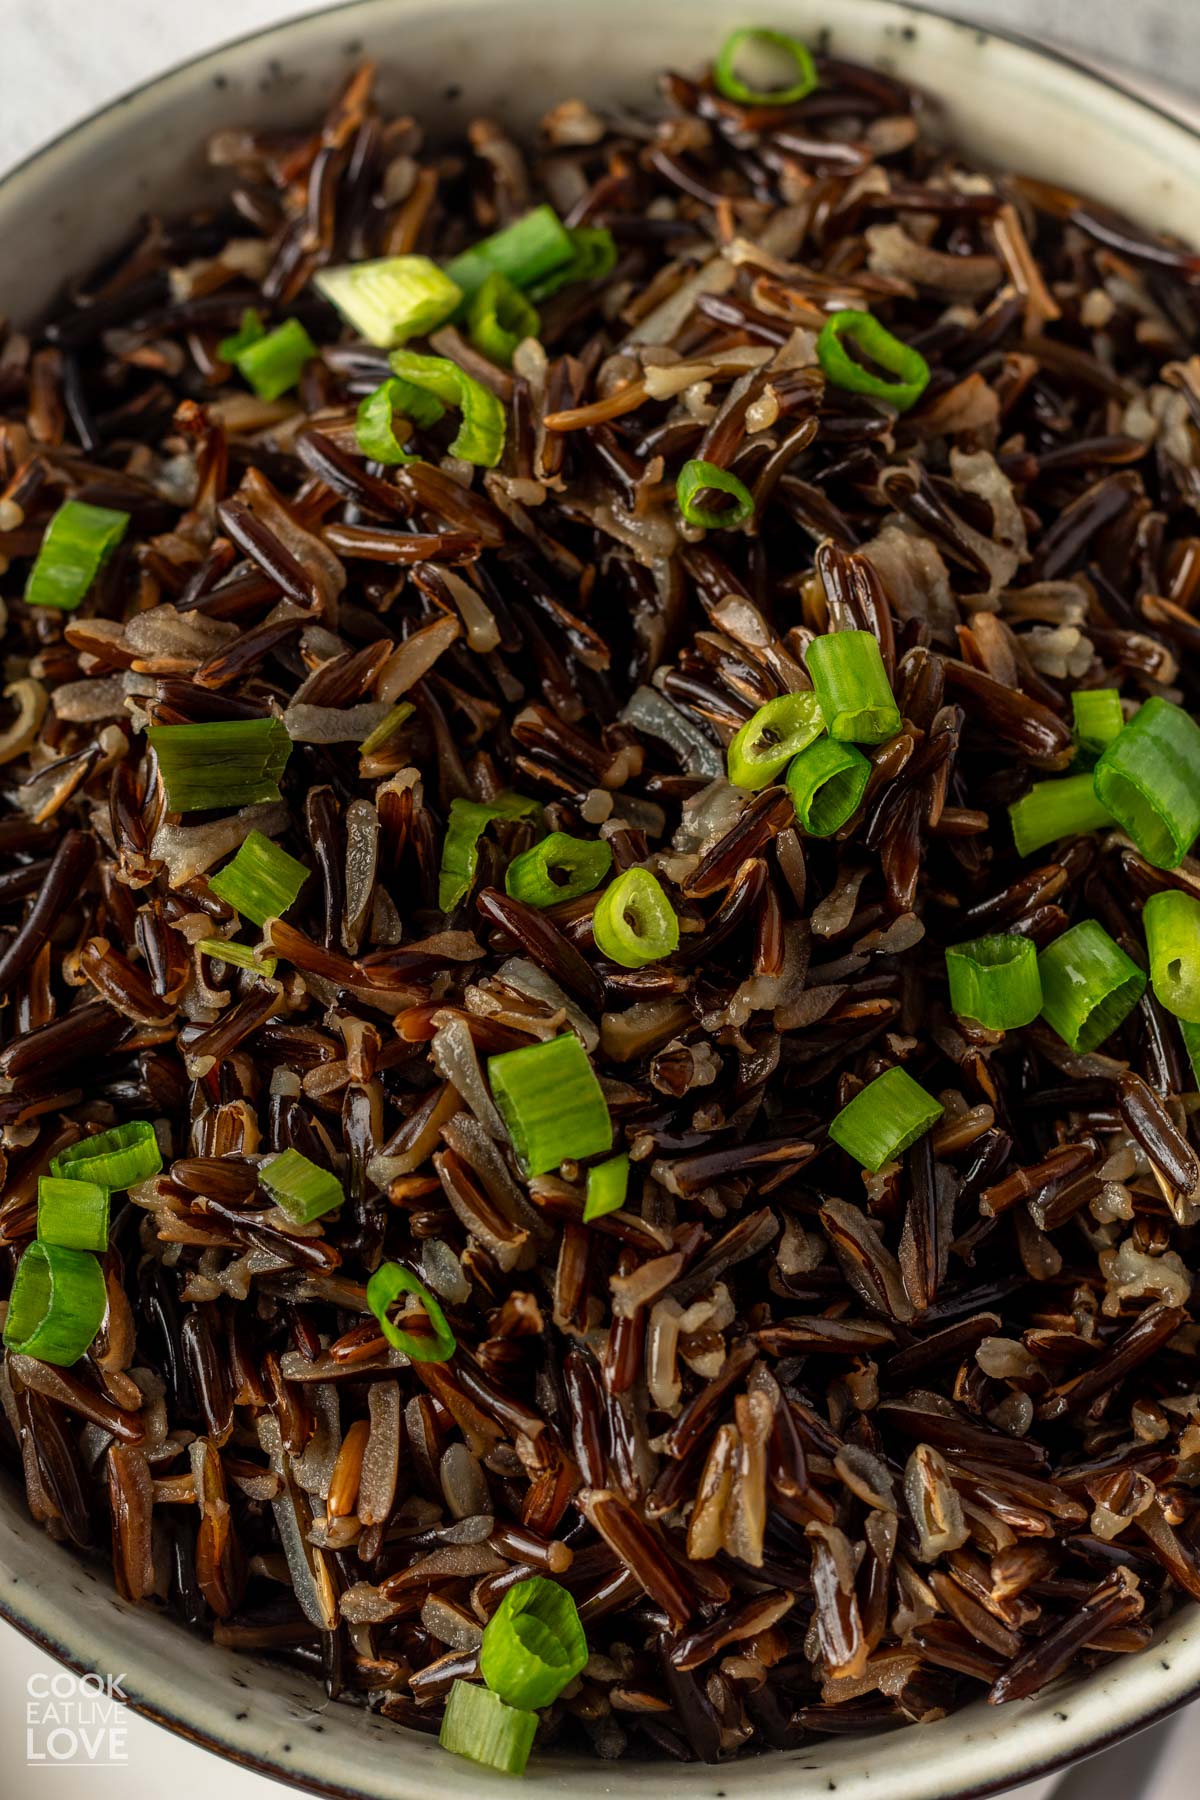 Wild rice in a bowl and garnished with green onions.